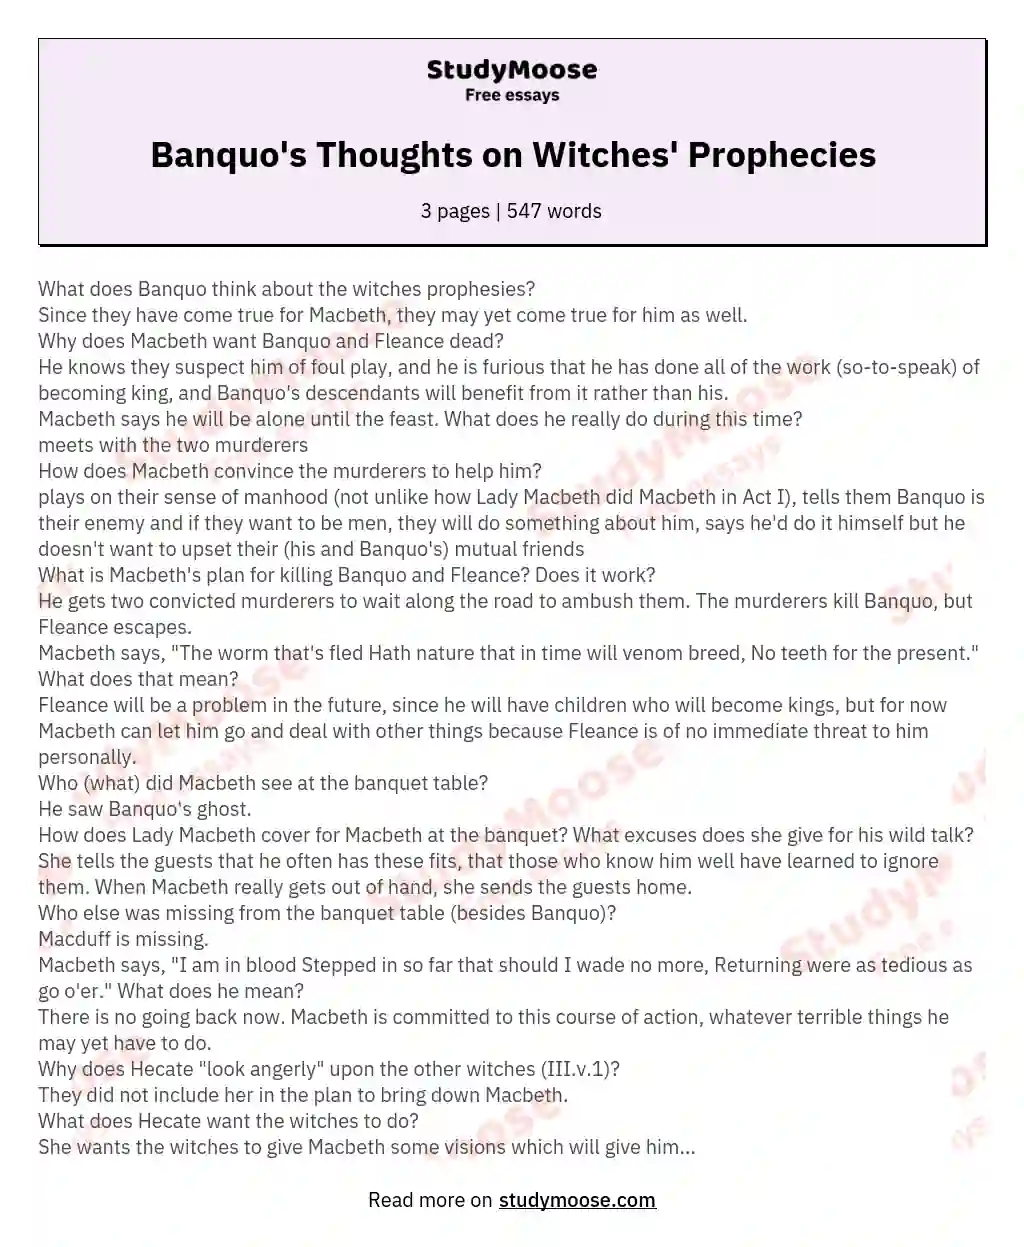 Banquo's Thoughts on Witches' Prophecies essay